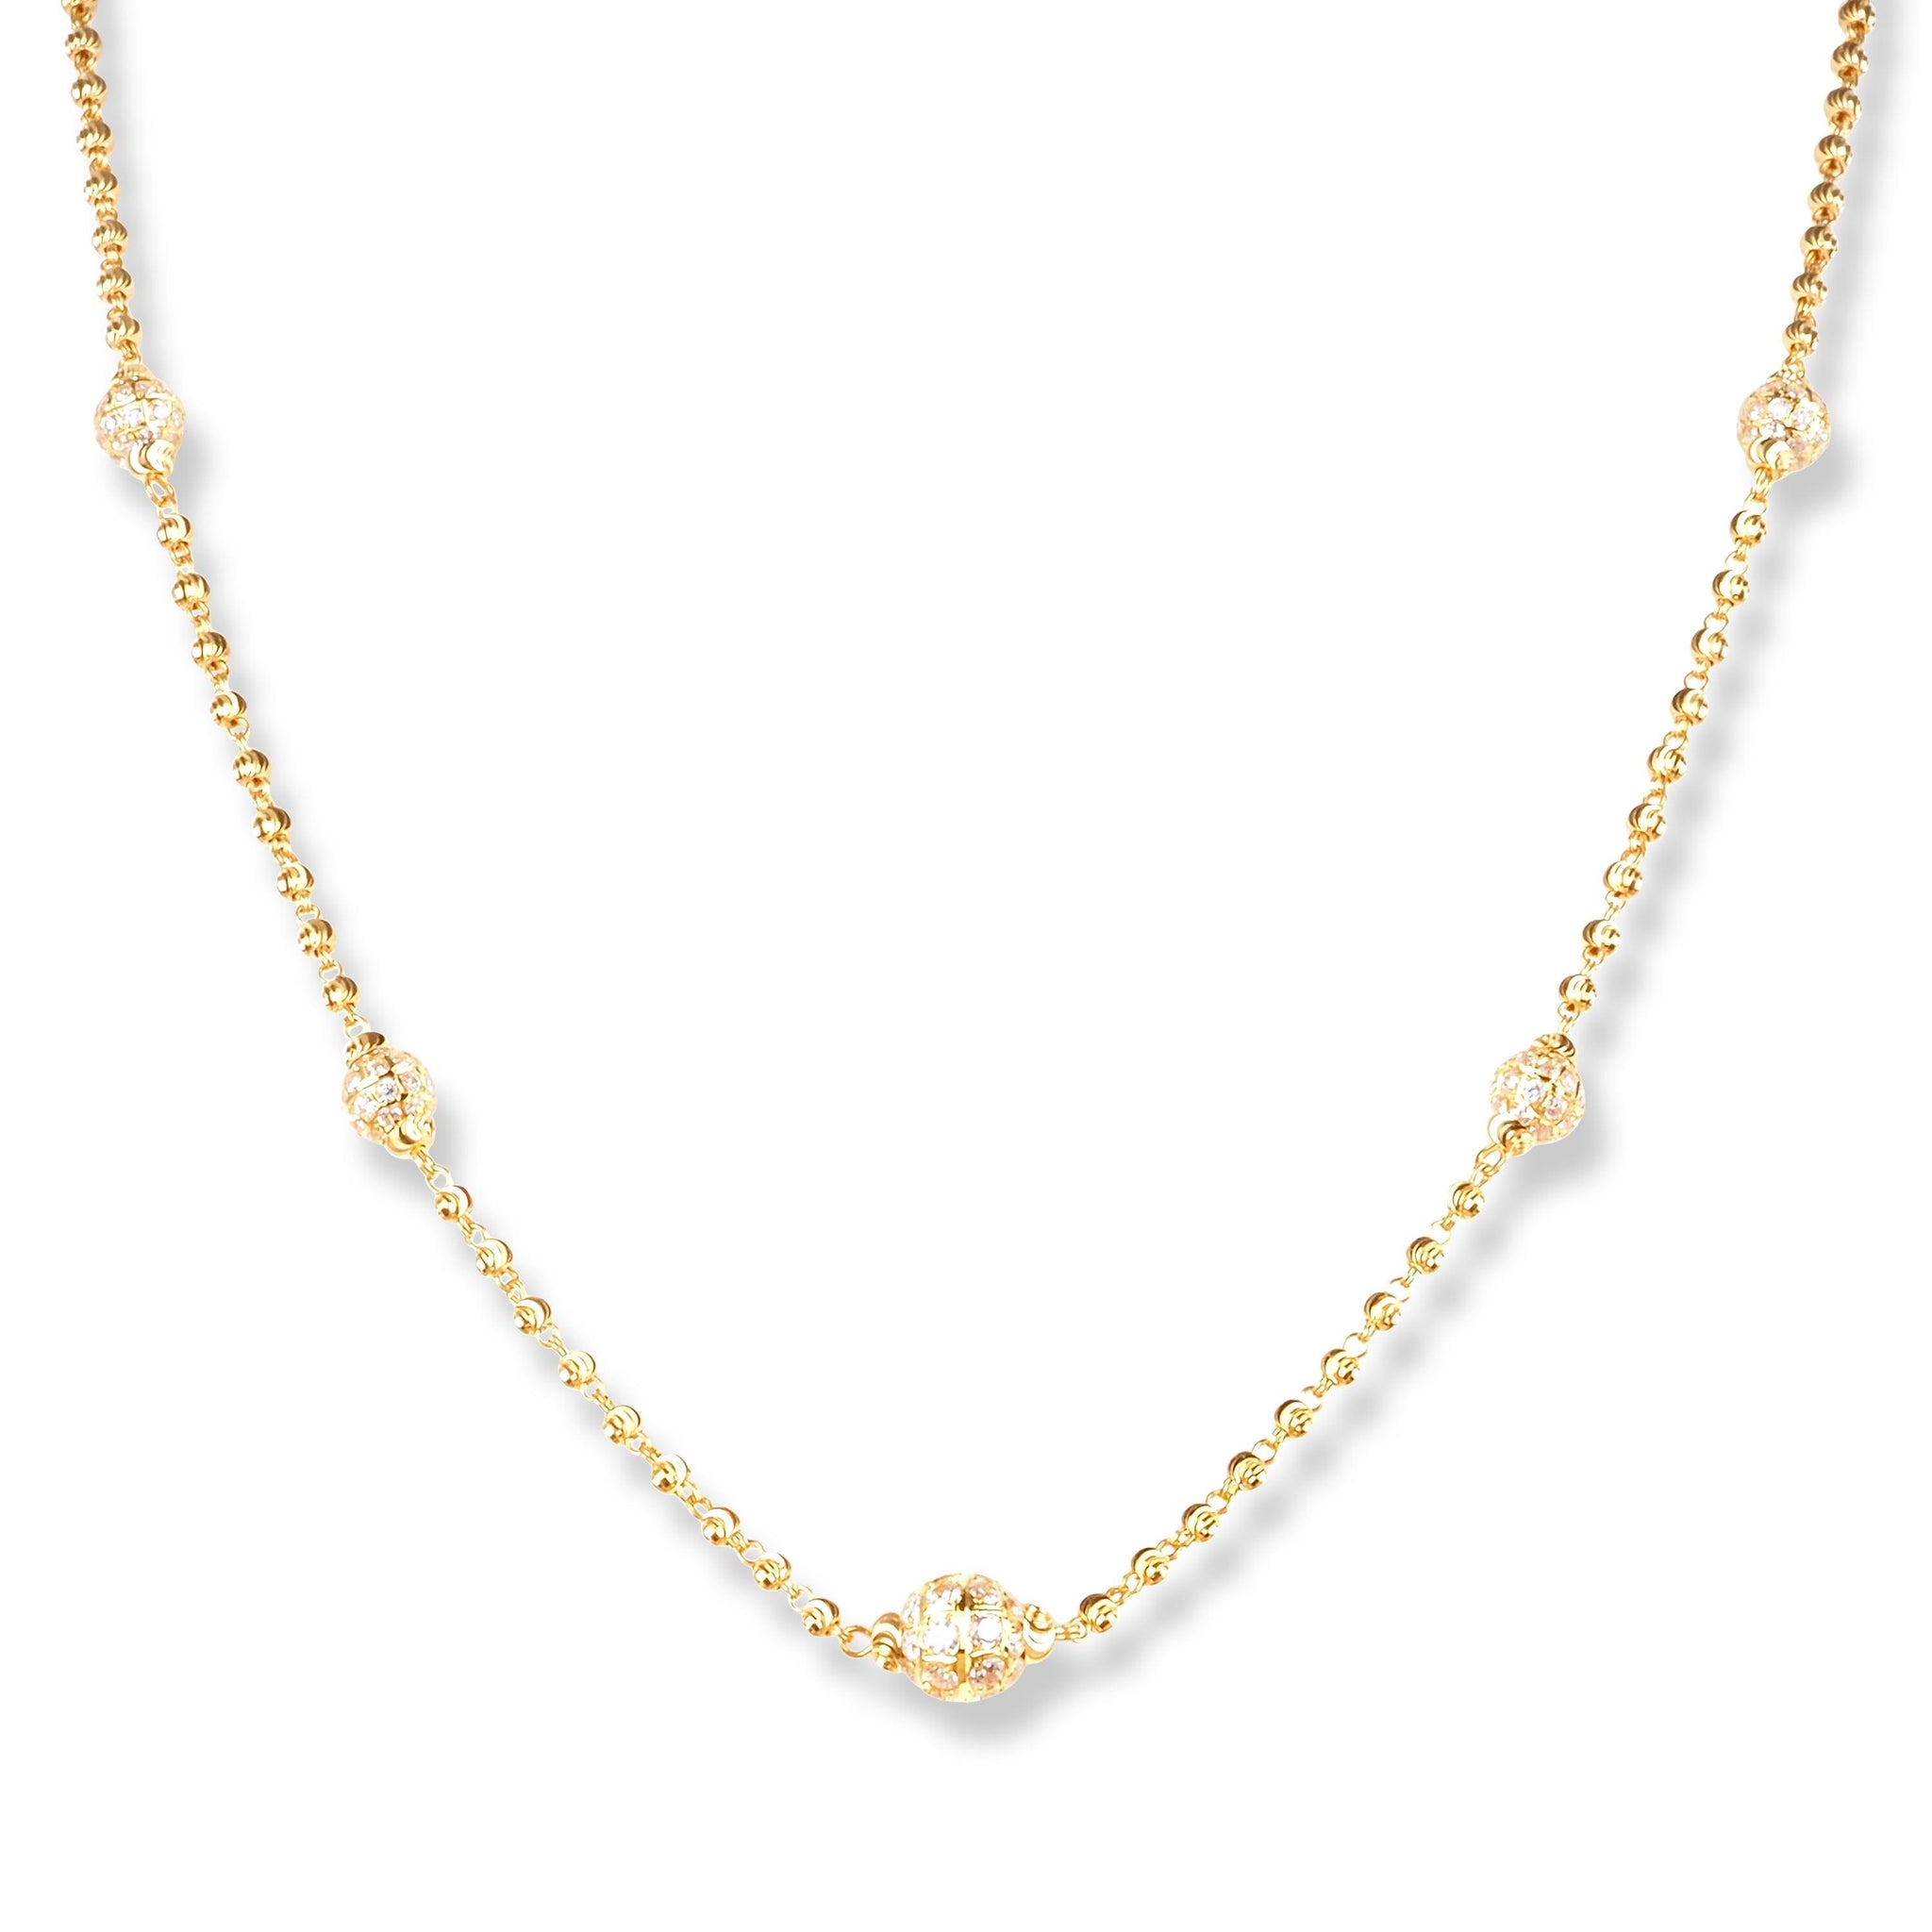 22ct Gold Necklace with Cubic Zirconia Stones and Diamond Cut Beads N-7899A-18